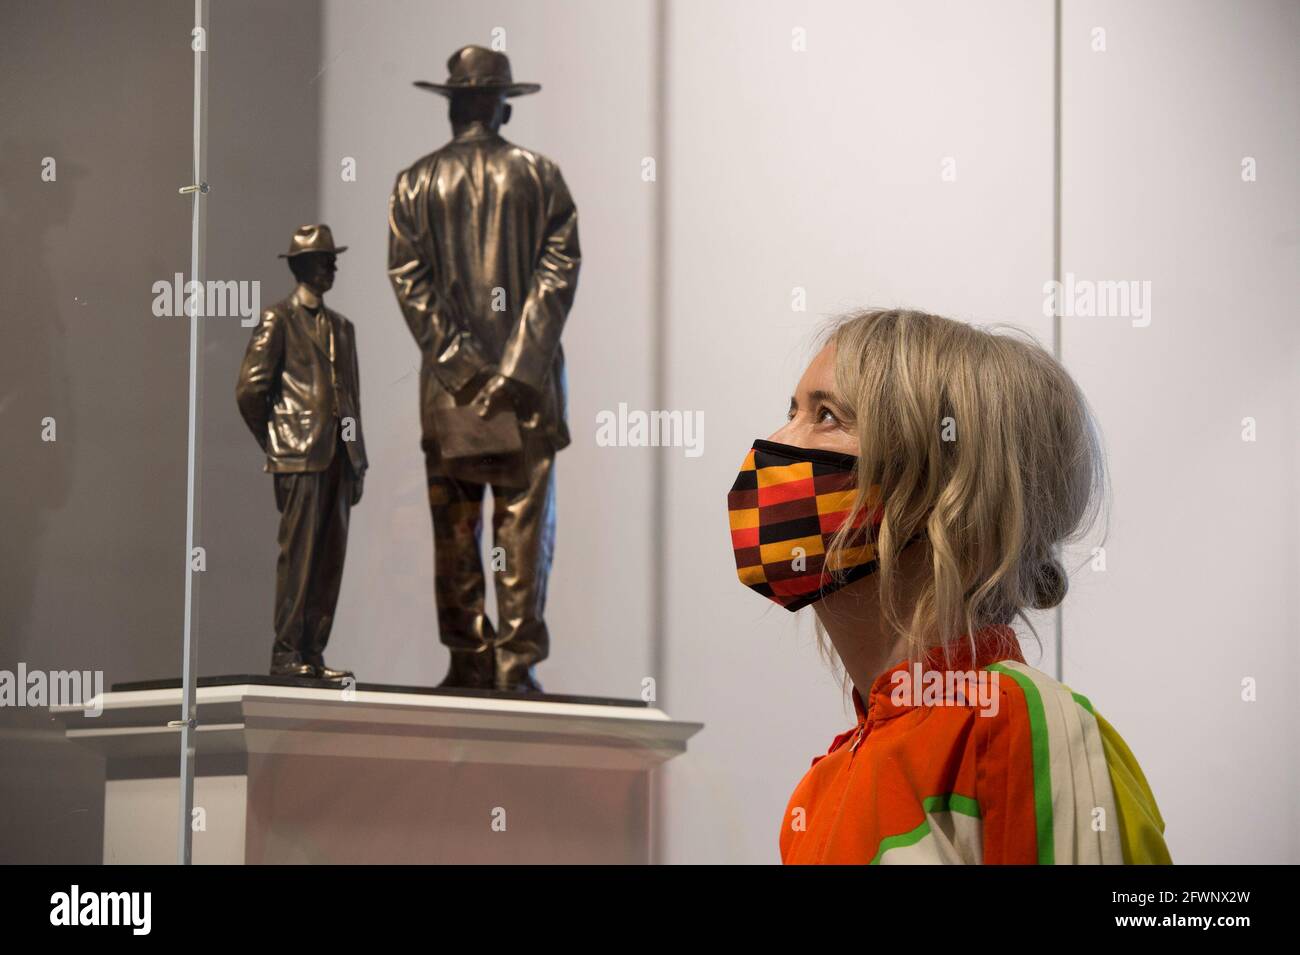 Deputy Mayor Justine Simons looks at Antelope by Samson Kambalu, at the National Gallery, in London, one of the six artworks prorposed as the next design for the Fourth Plinth at Trafalgar Square. Picture date: Monday May 24, 2021. Stock Photo